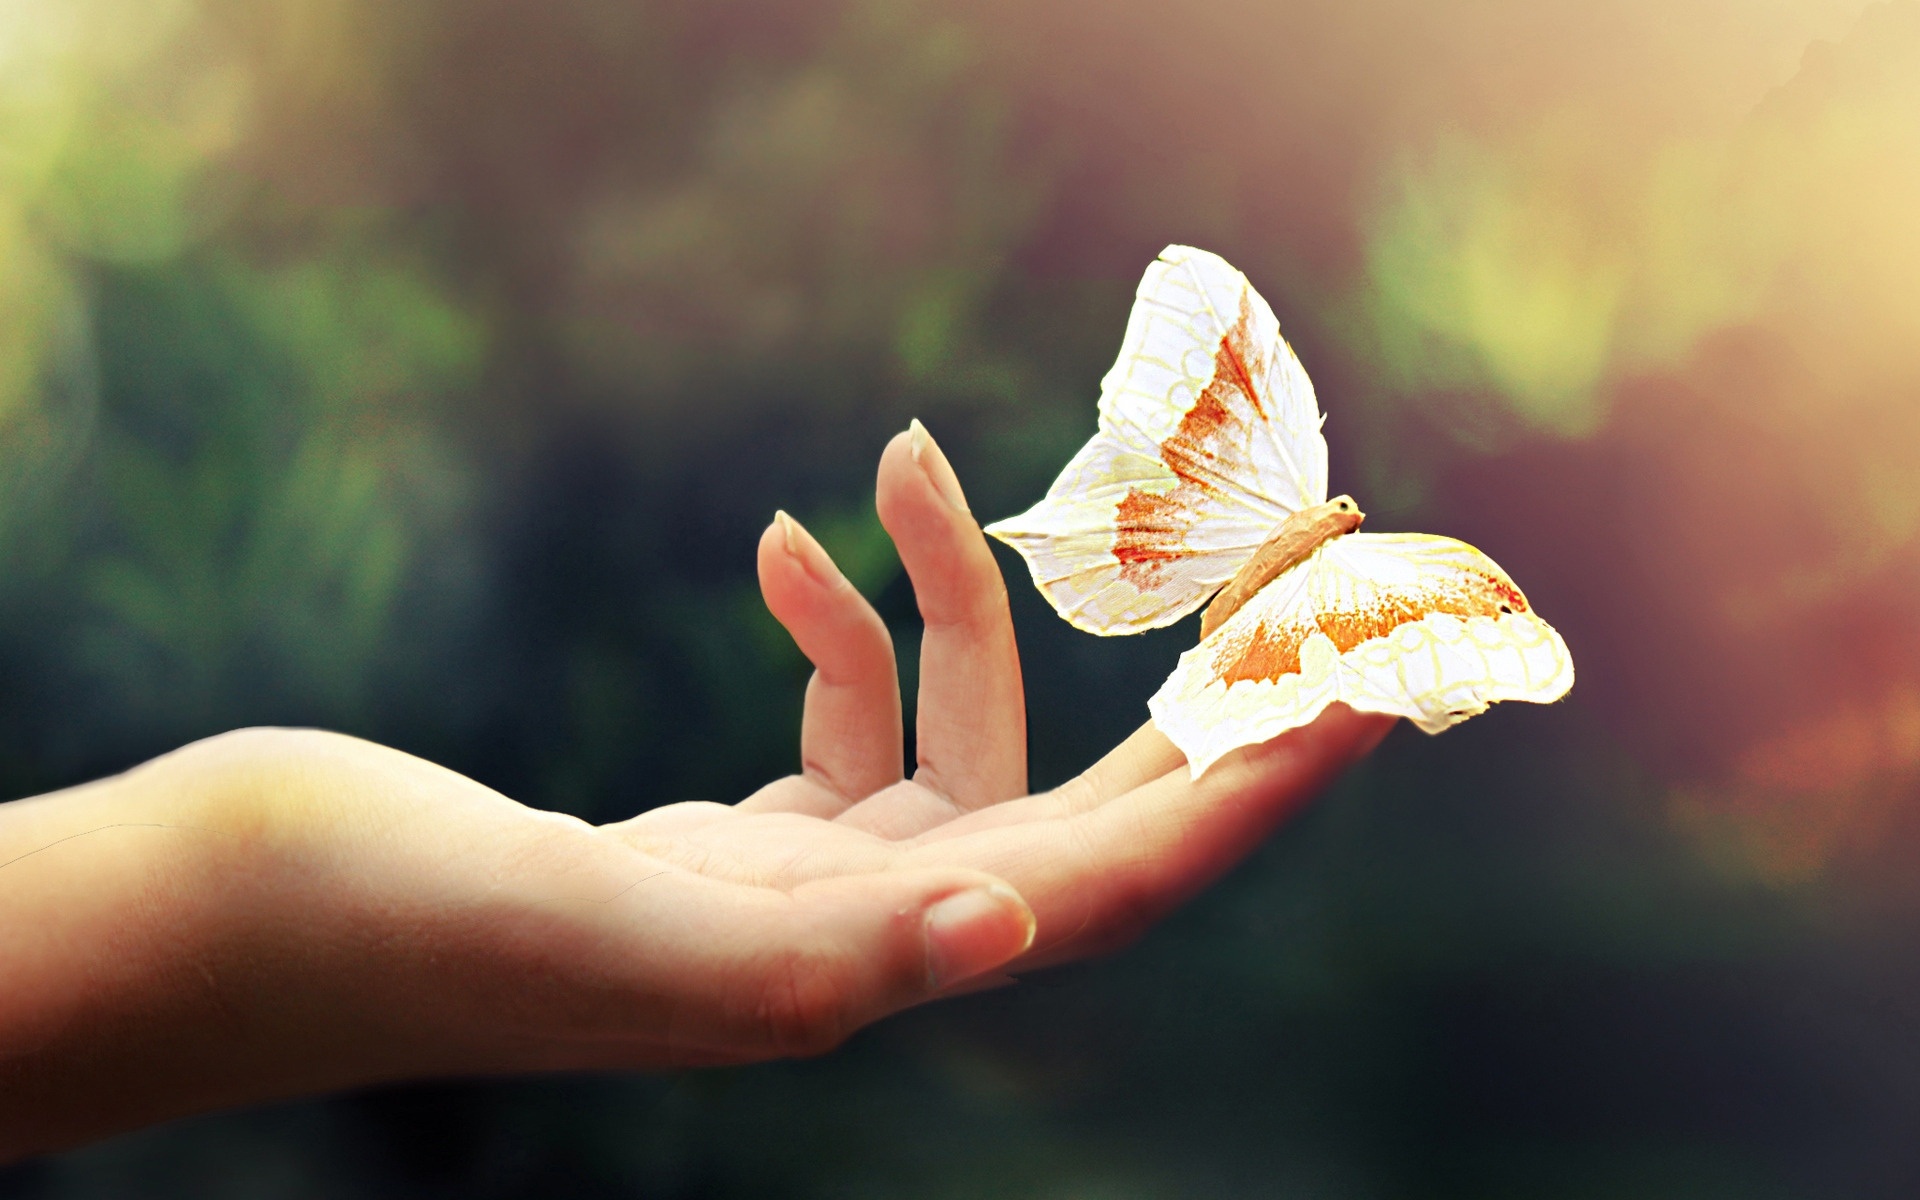 Butterfly In Her Hand Wallpaper And Stock Photos